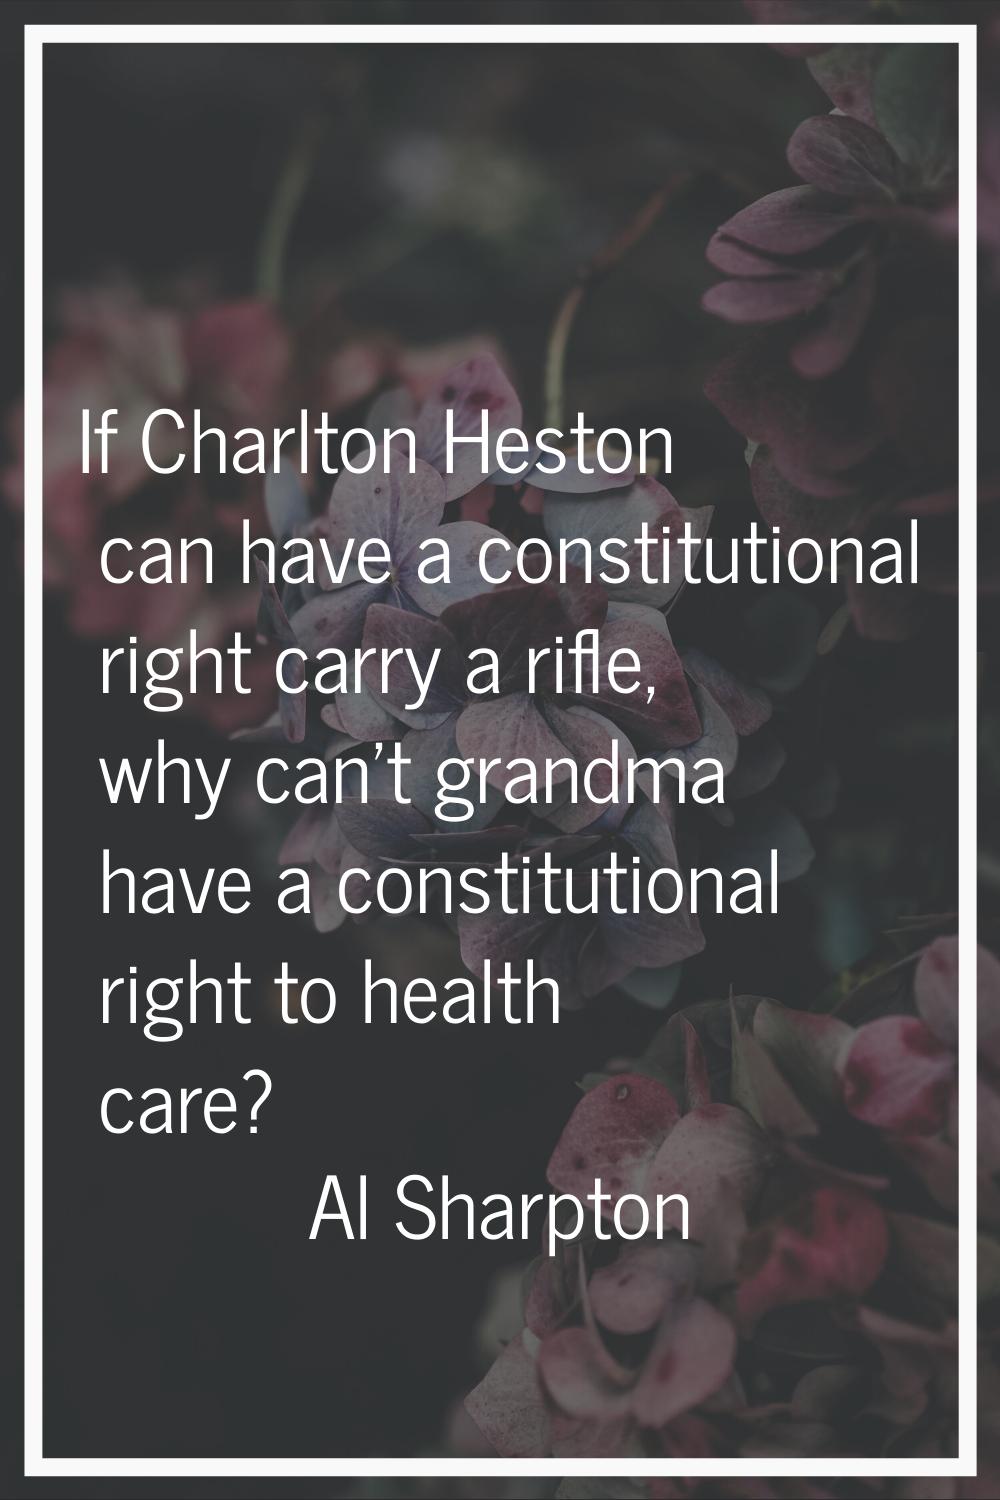 If Charlton Heston can have a constitutional right carry a rifle, why can't grandma have a constitu